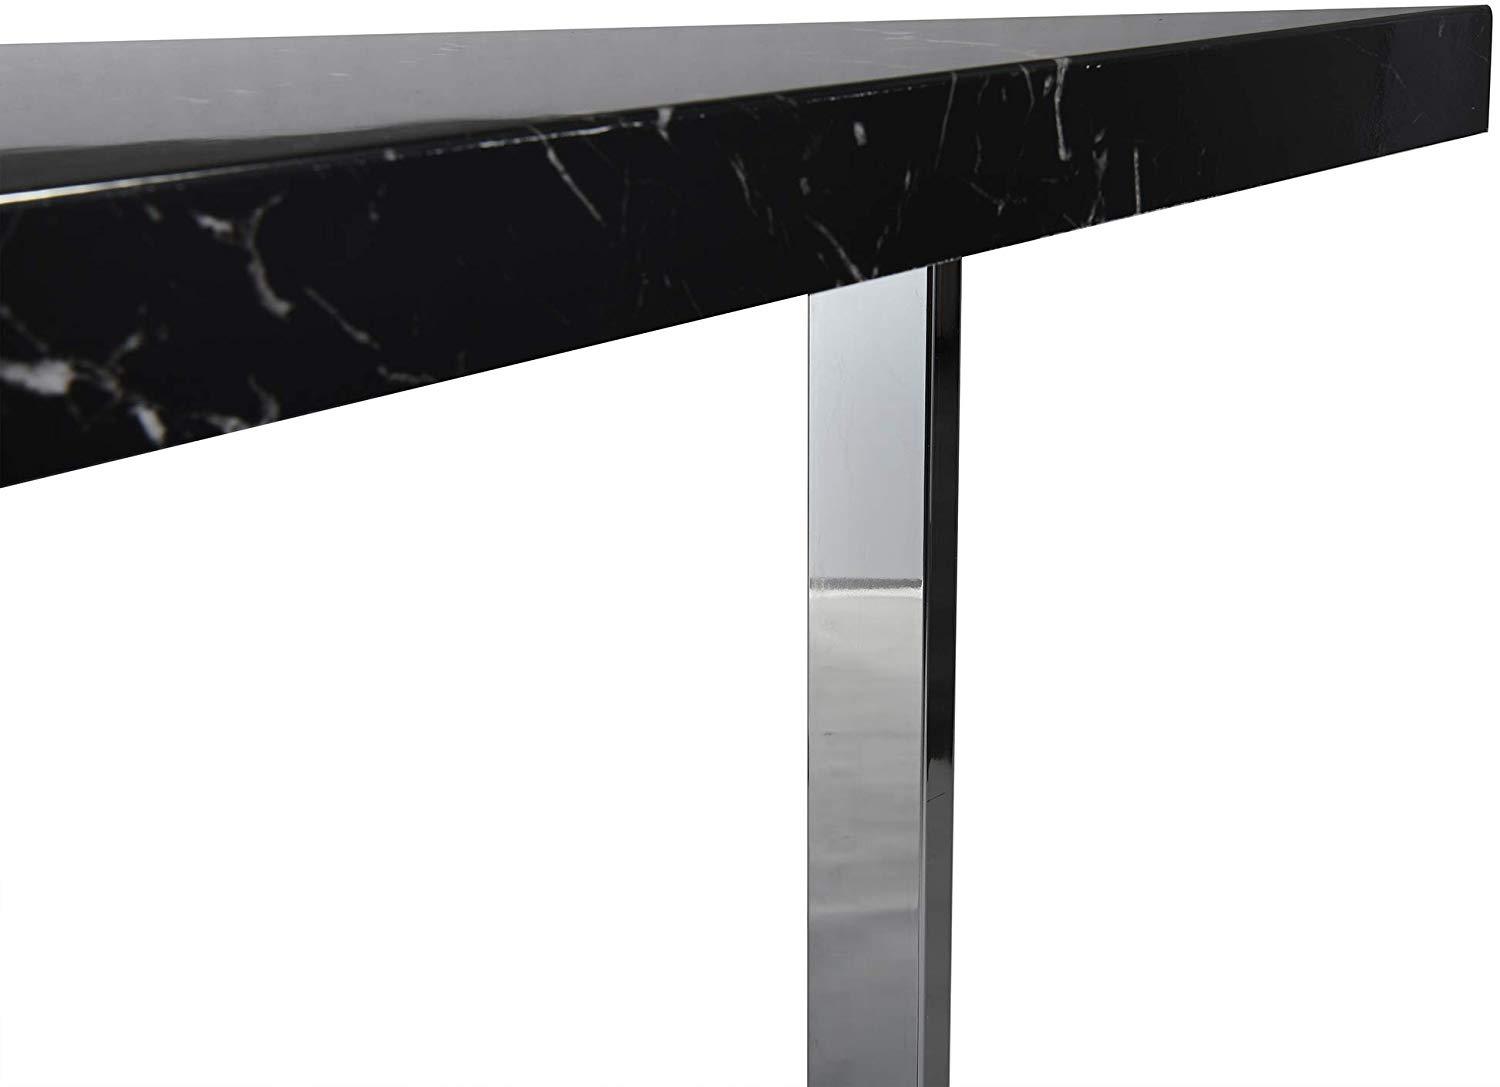 BIASCA 6-Seater High Gloss Marble Effect Dining Table with Silver Chrome Legs Black